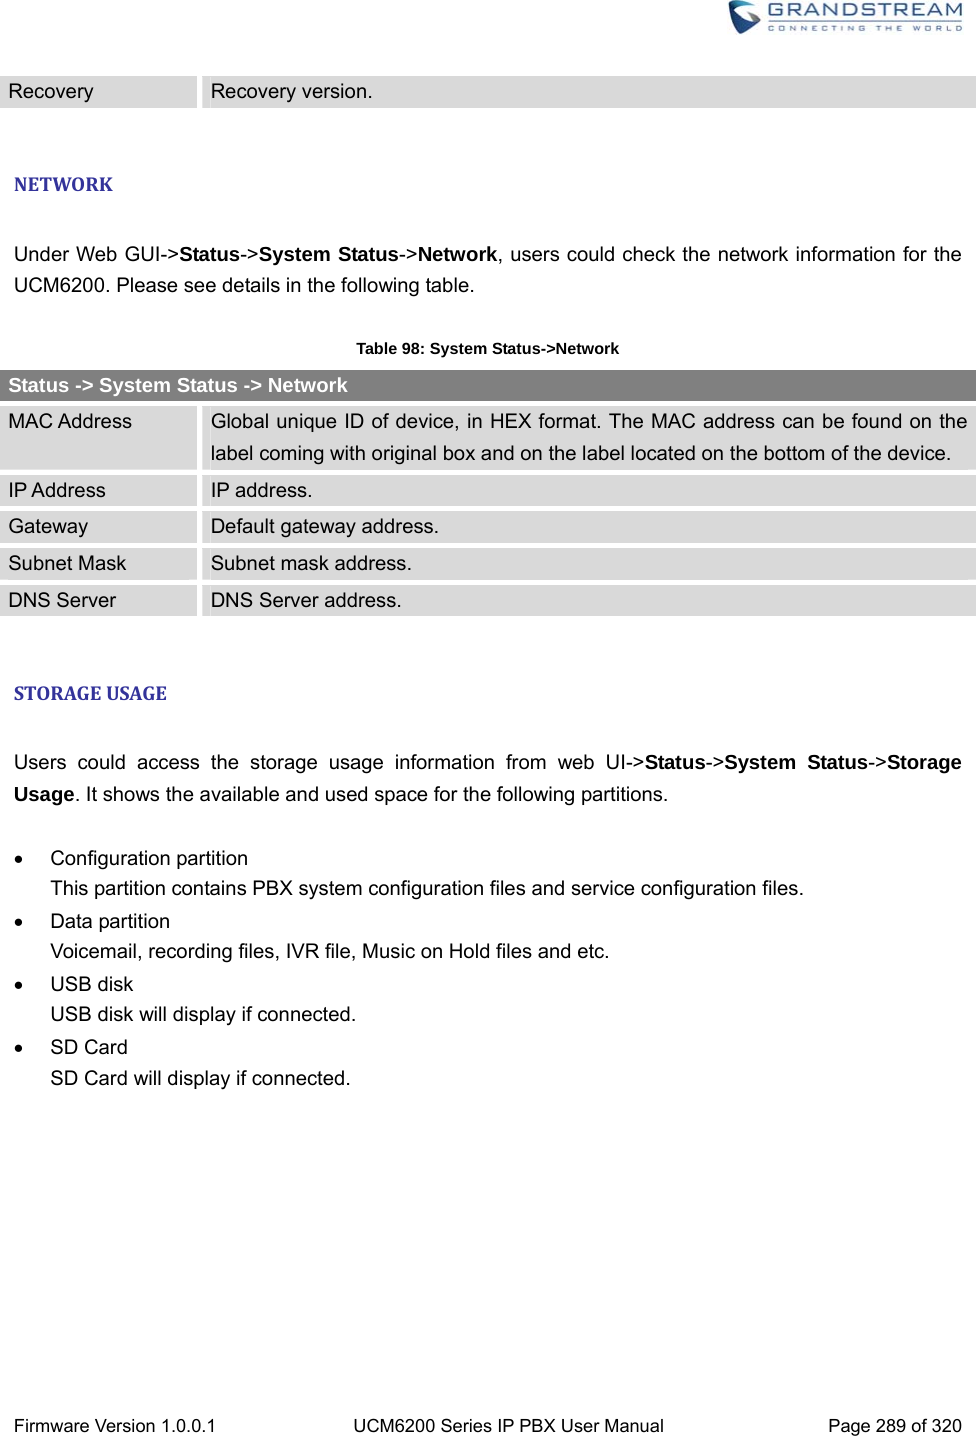  Firmware Version 1.0.0.1  UCM6200 Series IP PBX User Manual  Page 289 of 320 Recovery  Recovery version.  NETWORK Under Web GUI-&gt;Status-&gt;System Status-&gt;Network, users could check the network information for the UCM6200. Please see details in the following table.  Table 98: System Status-&gt;Network Status -&gt; System Status -&gt; Network MAC Address  Global unique ID of device, in HEX format. The MAC address can be found on the label coming with original box and on the label located on the bottom of the device. IP Address  IP address. Gateway  Default gateway address. Subnet Mask  Subnet mask address. DNS Server  DNS Server address.  STORAGEUSAGE Users could access the storage usage information from web UI-&gt;Status-&gt;System Status-&gt;Storage Usage. It shows the available and used space for the following partitions.   Configuration partition This partition contains PBX system configuration files and service configuration files.  Data partition Voicemail, recording files, IVR file, Music on Hold files and etc.  USB disk USB disk will display if connected.  SD Card SD Card will display if connected. 